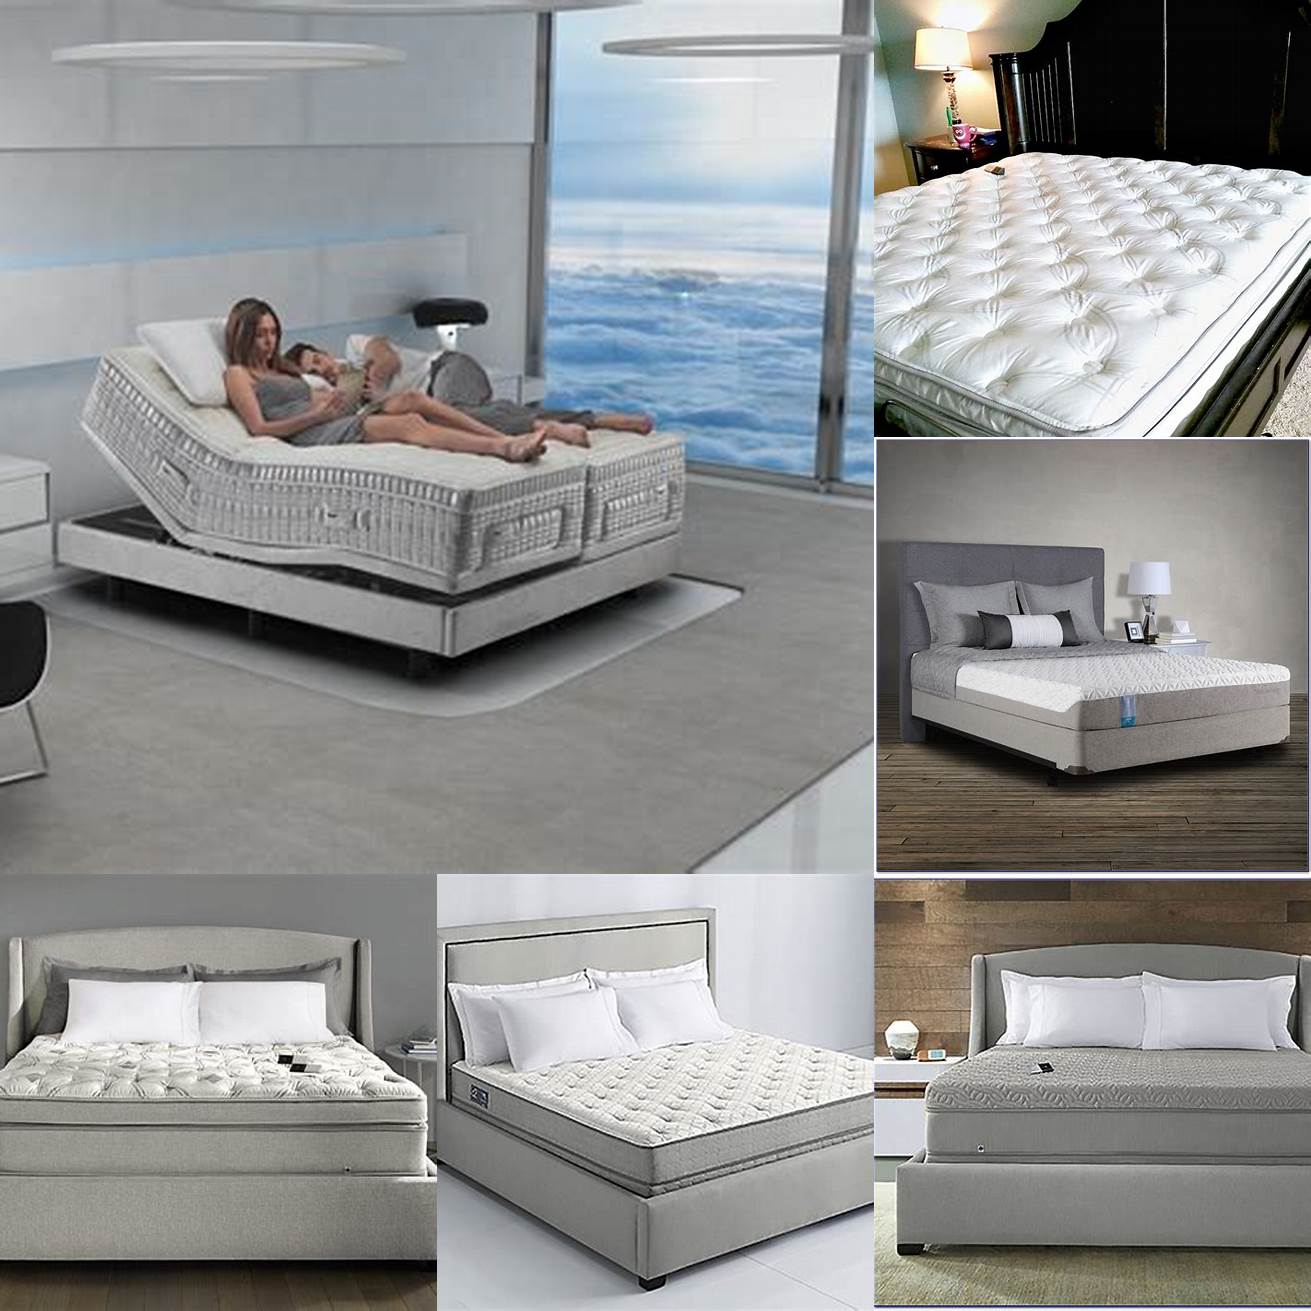 Image of a customer using the Sleep Number Bed Frame